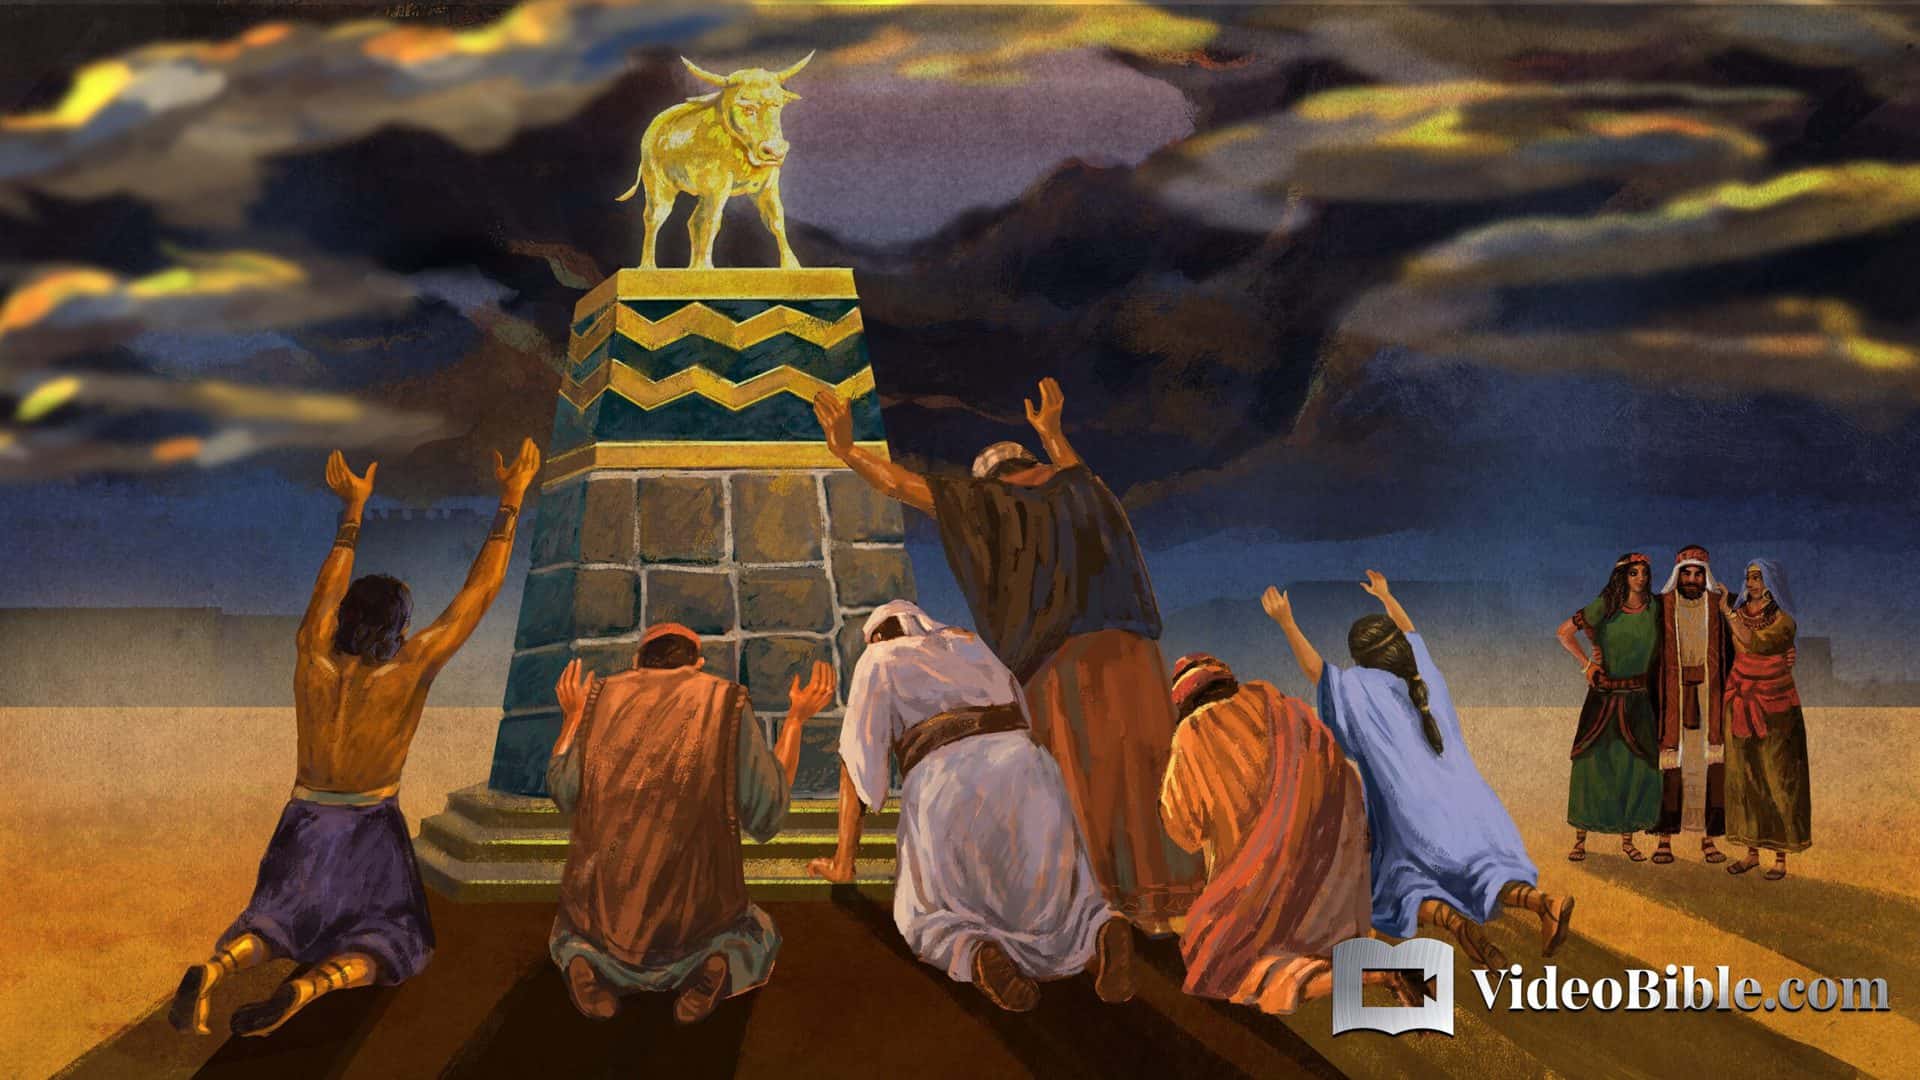 Israelites bowing down to the idol of Baal golden calf